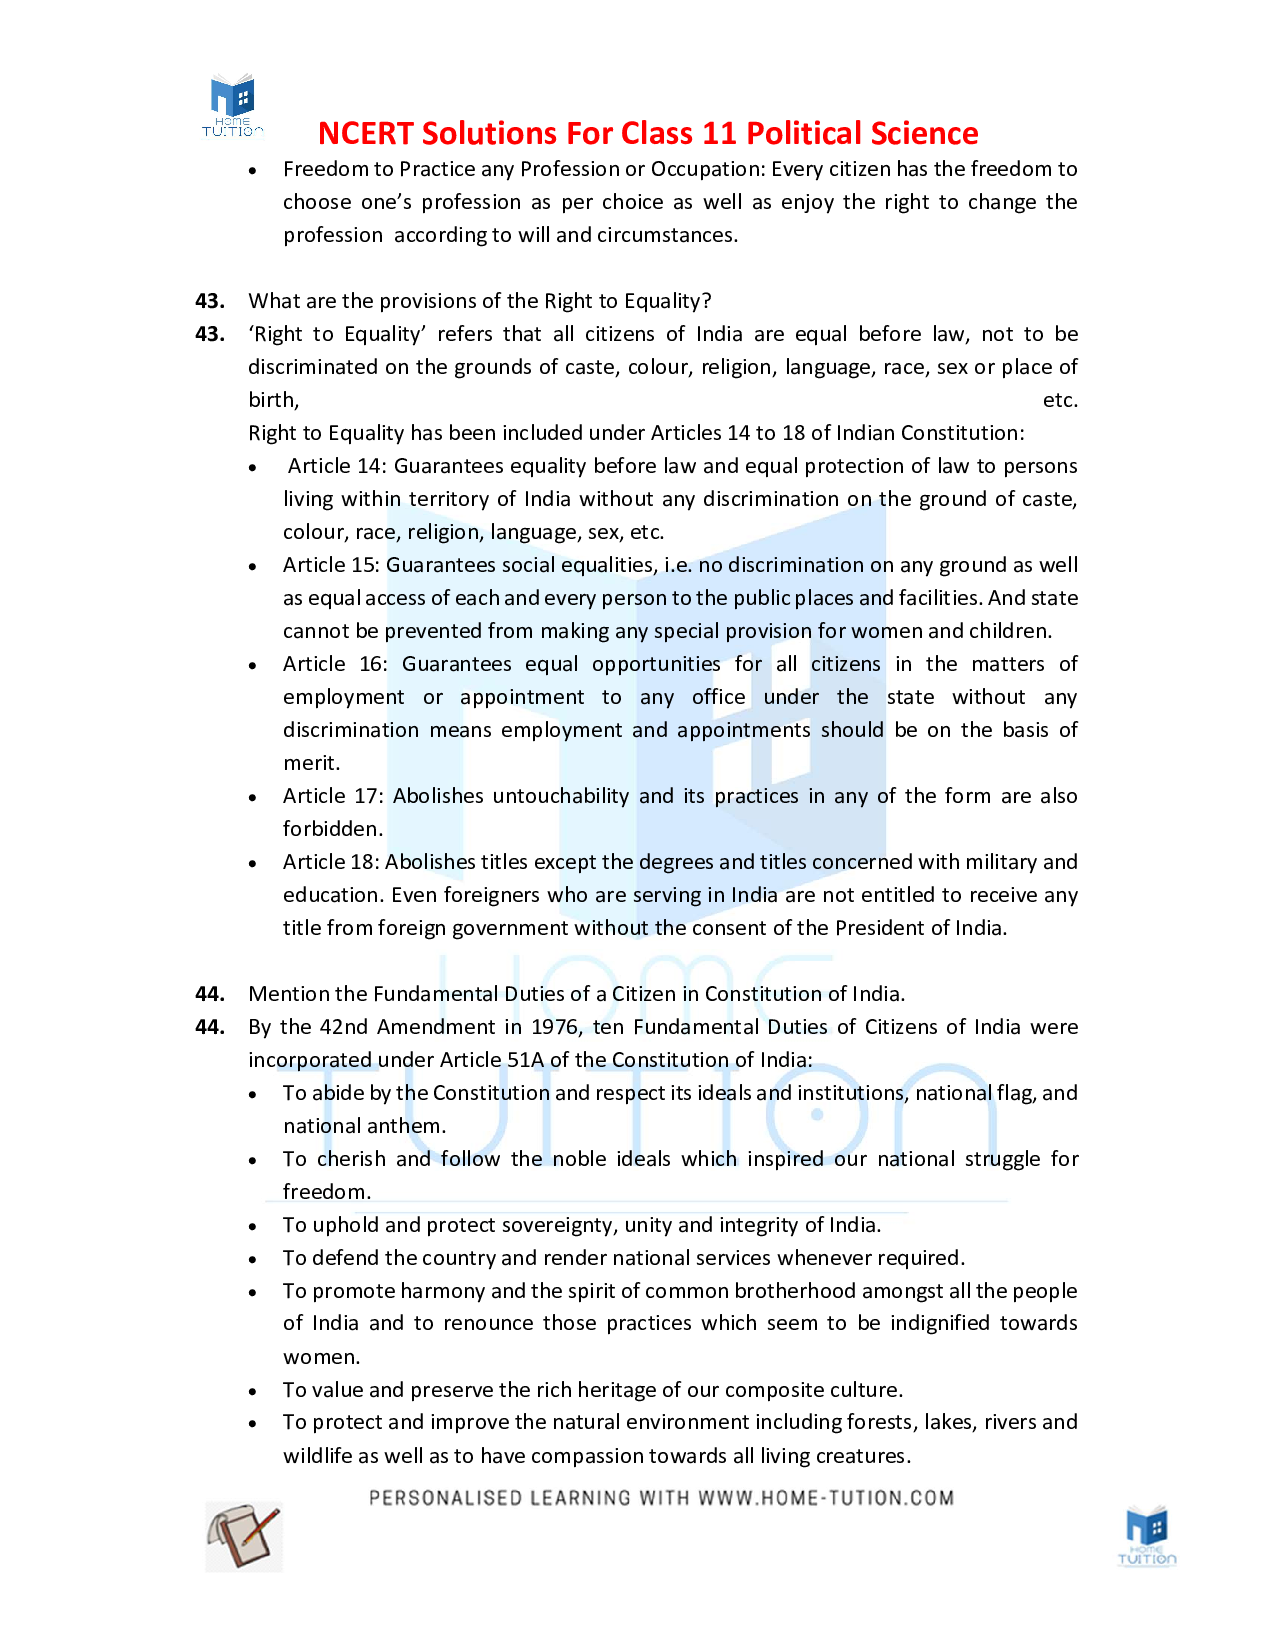 Chapter 2 Rights and Duties in the Indian Constitution